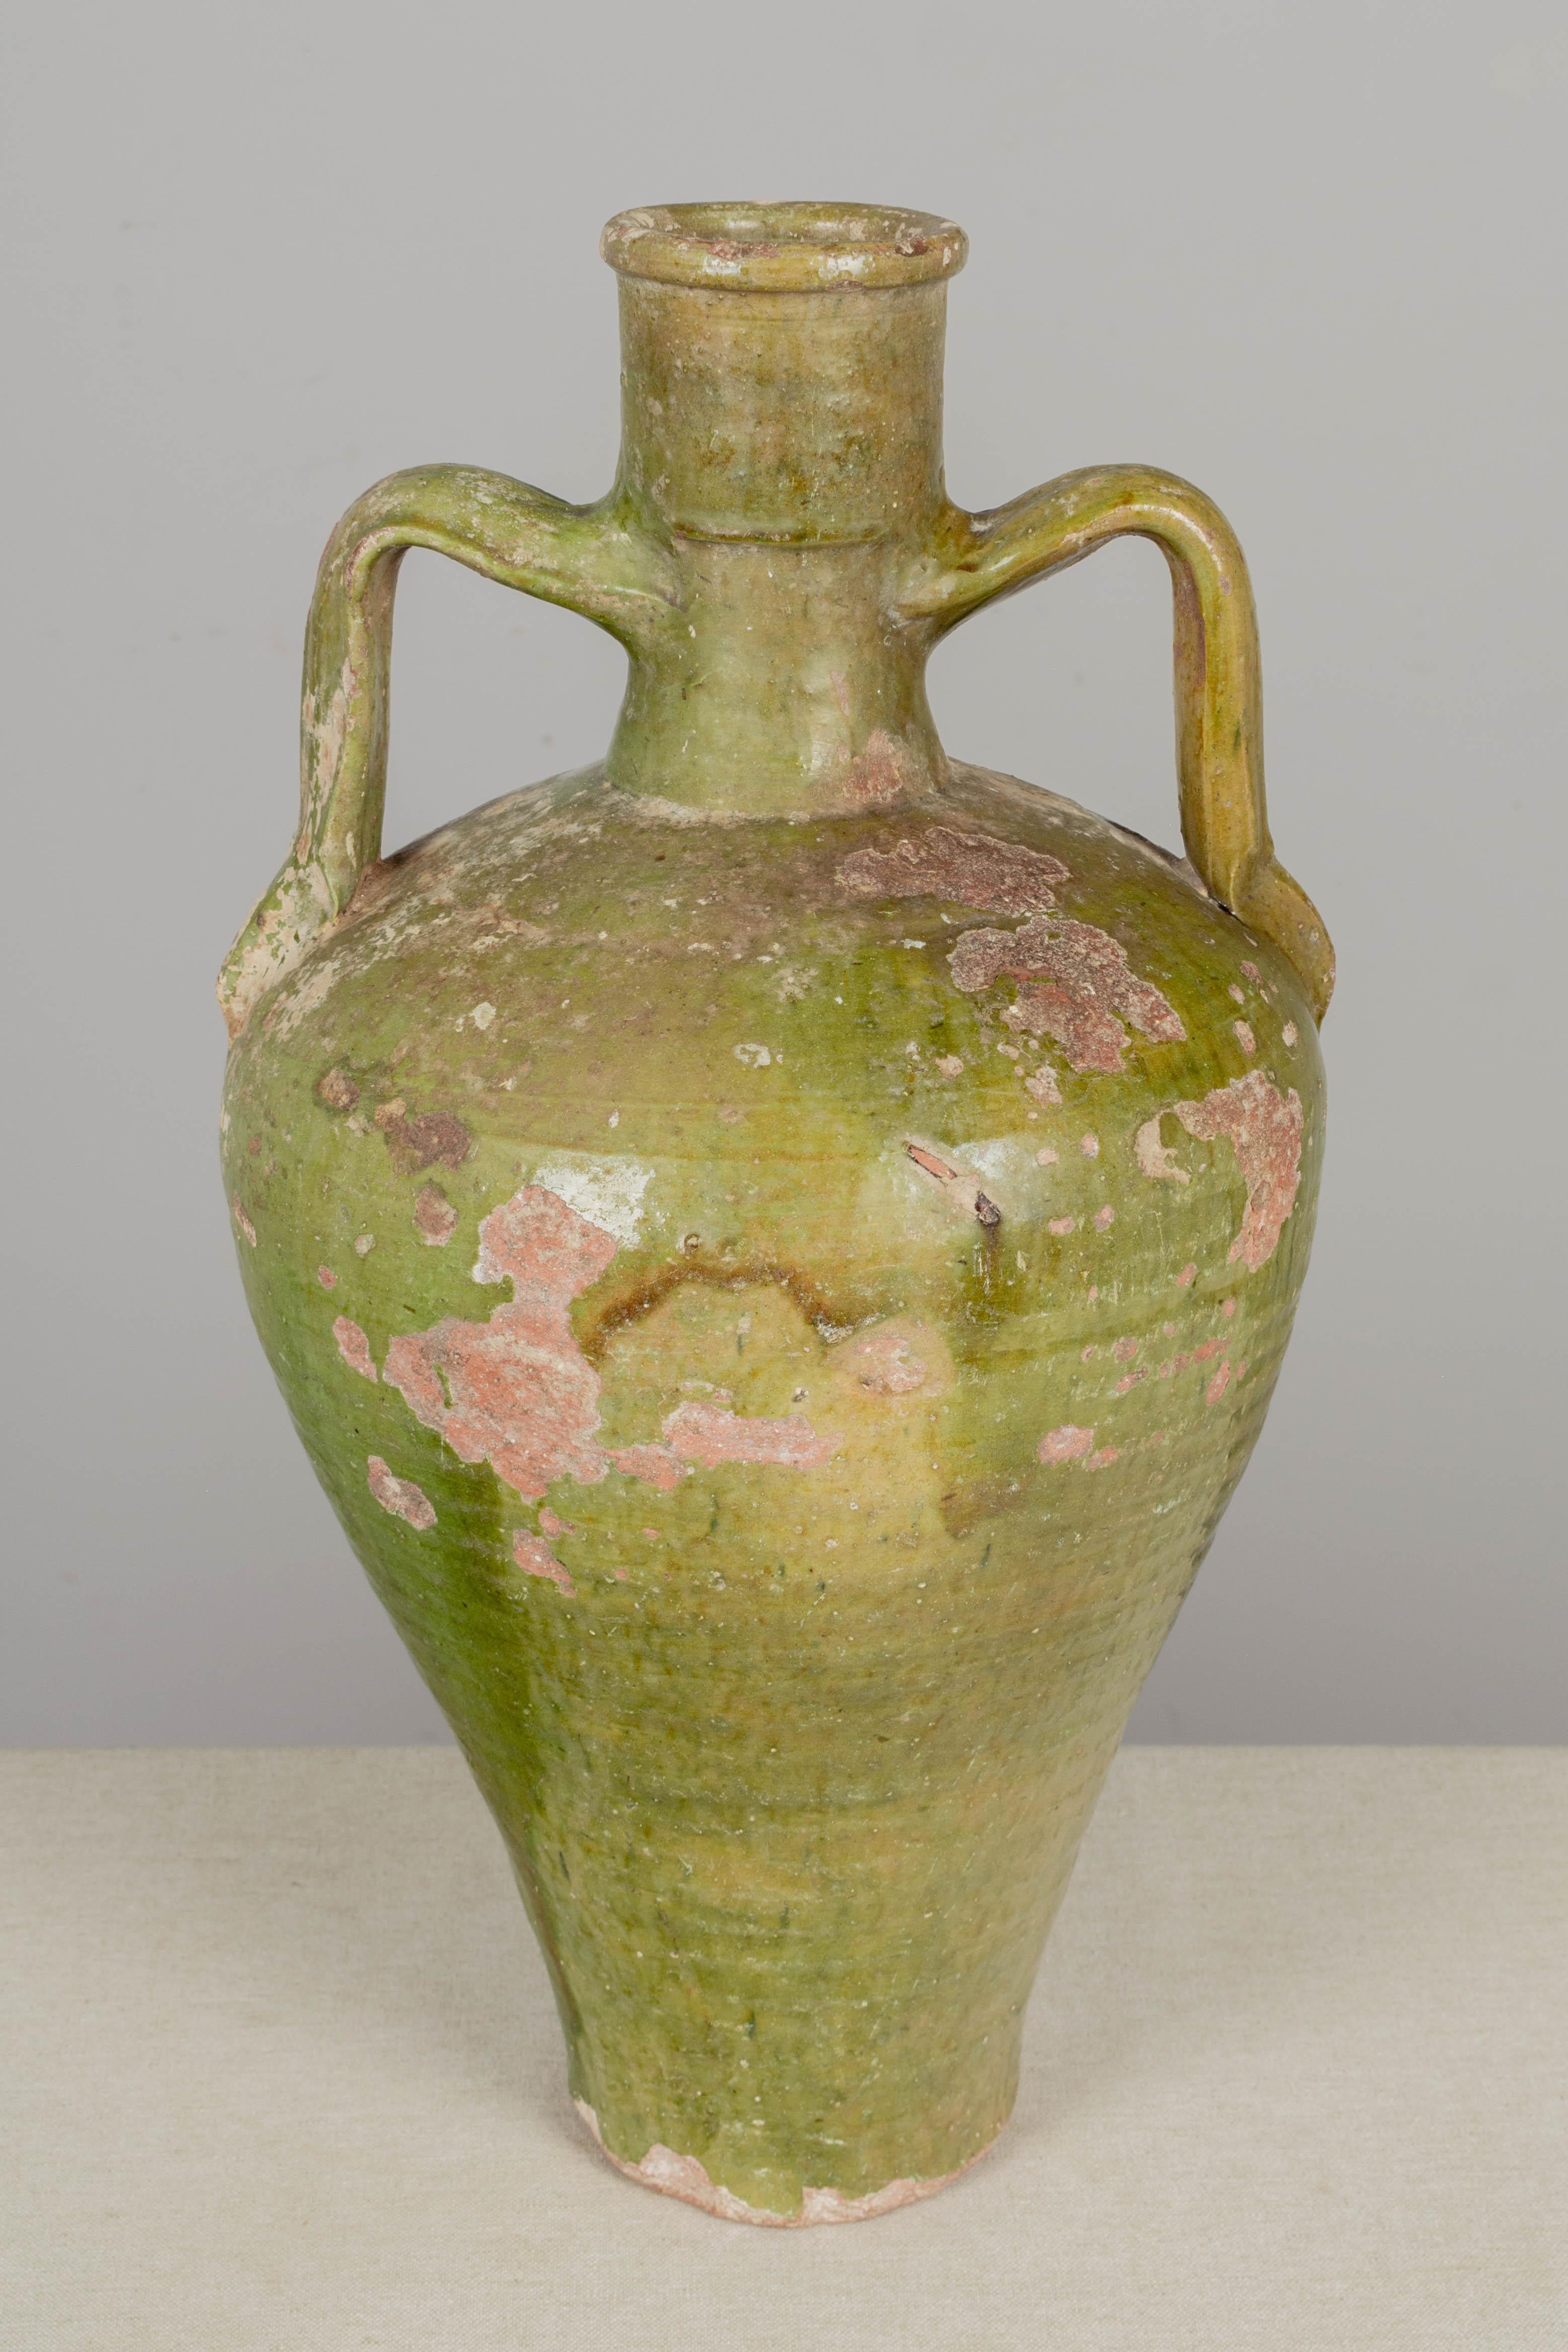 An early 19th century French green glazed terracotta double handled water jar from Auvergne. Nice old patina with patches of glaze loss. Circa 1820-1830. 
18.5